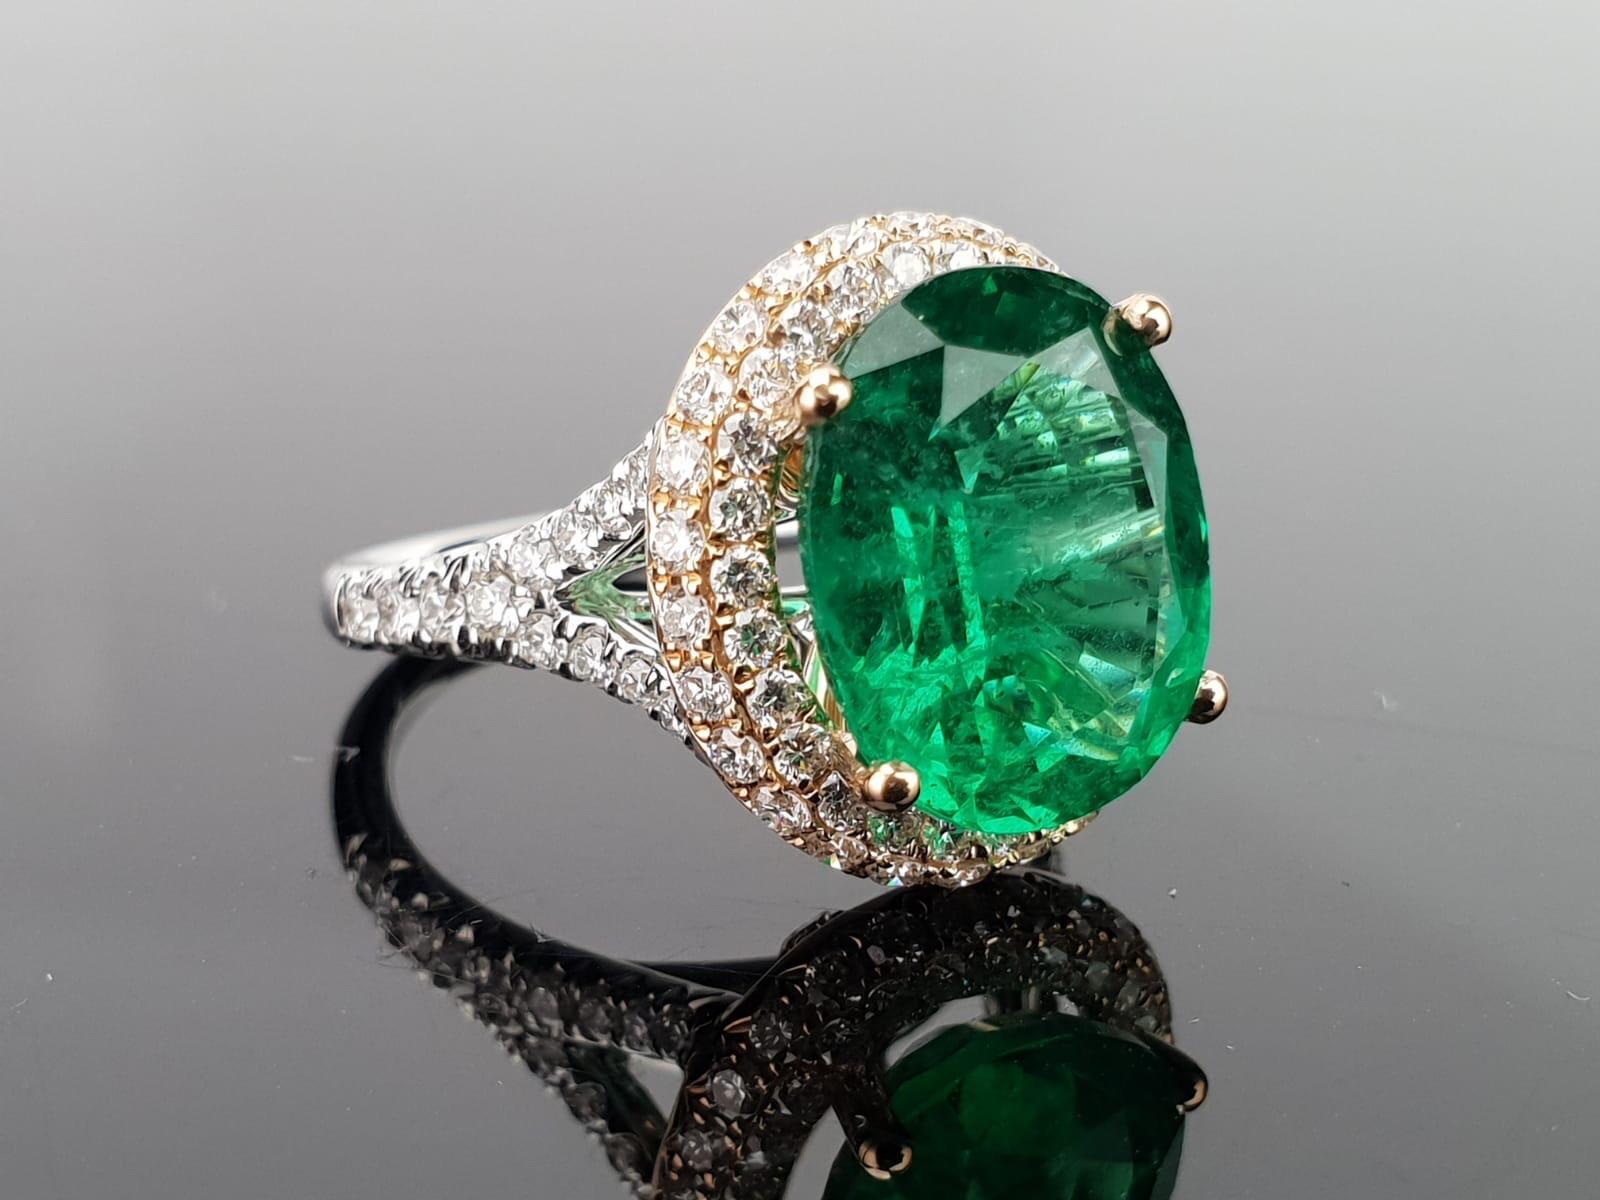 An elegant and simple cocktail ring using a 5.46 carat round cut Zambian Emerald centre stone, with 1.16 carat, 92 pieces of brilliant cut diamonds sorrounding it, all set in 18K white and rose gold.   

Stone Details: 
Stone: Zambian Emerald 
Carat